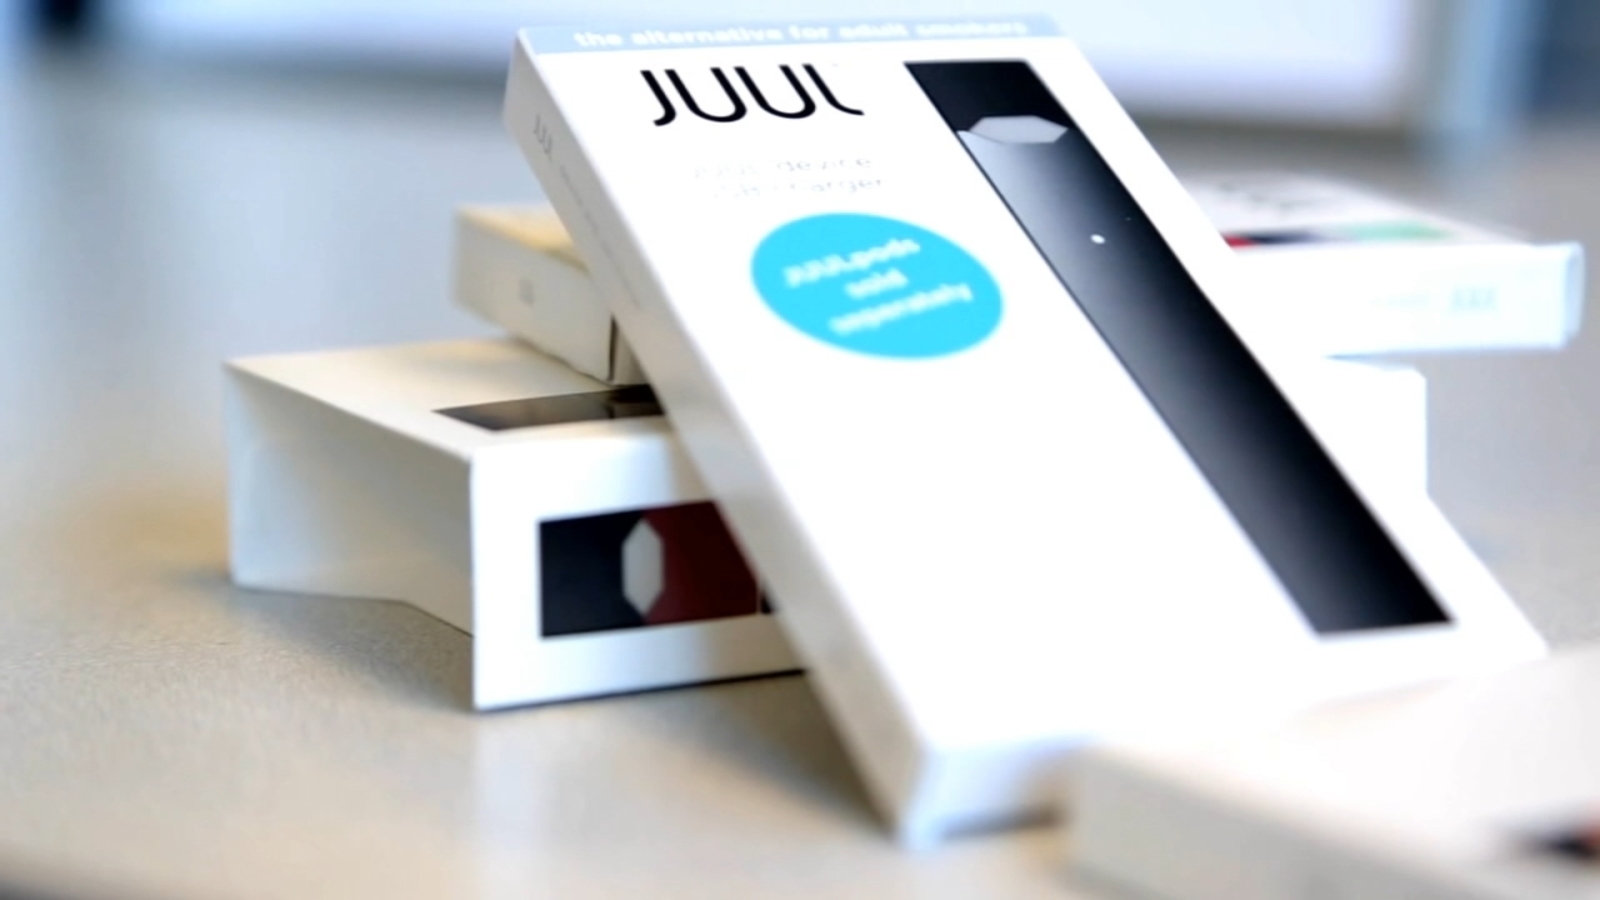 Juul: FDA reverses order taking vaping products off the market in US, opens door to possible authorization [Video]